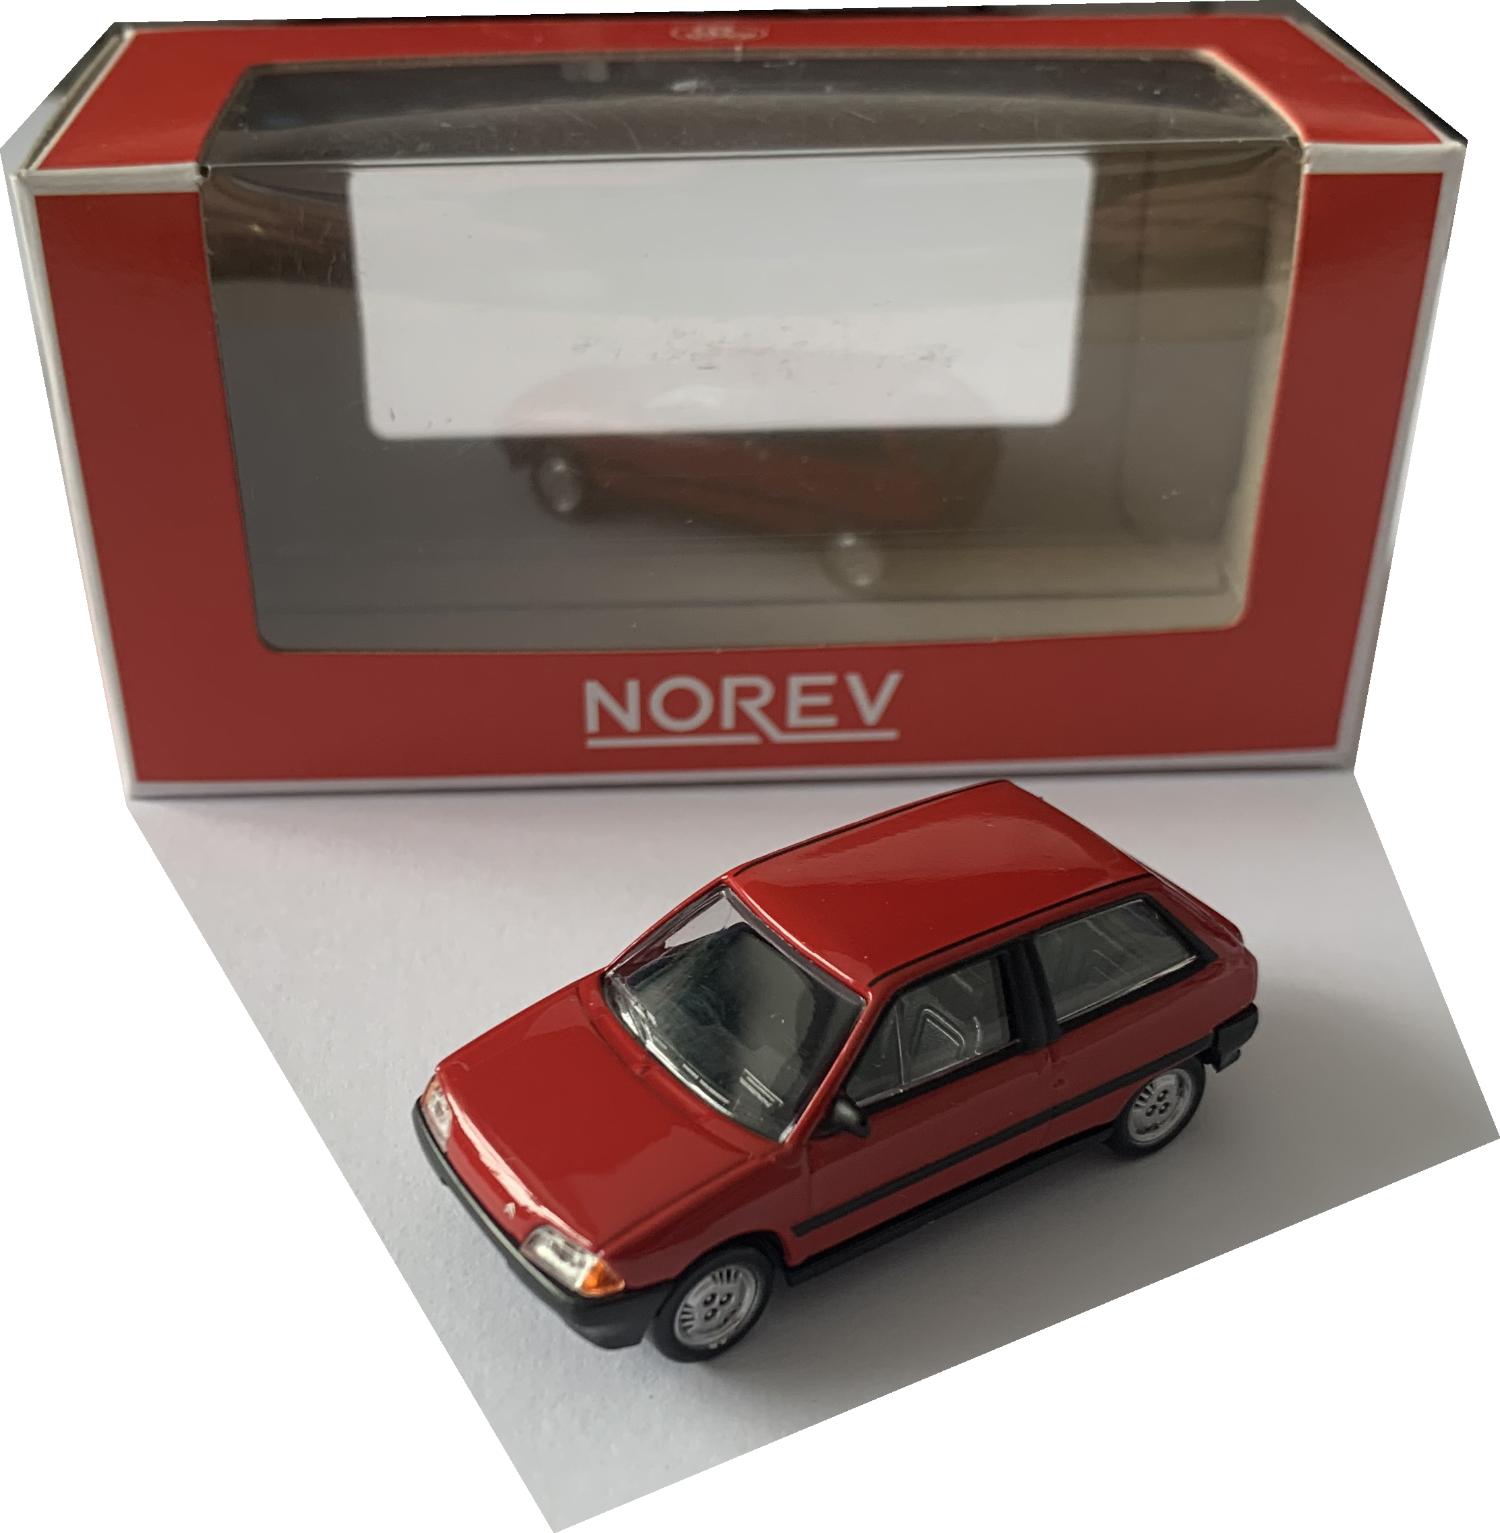 Citroen AX 1986 in red 1:64 scale model car from Norev, 310920, approx 5.5cm long